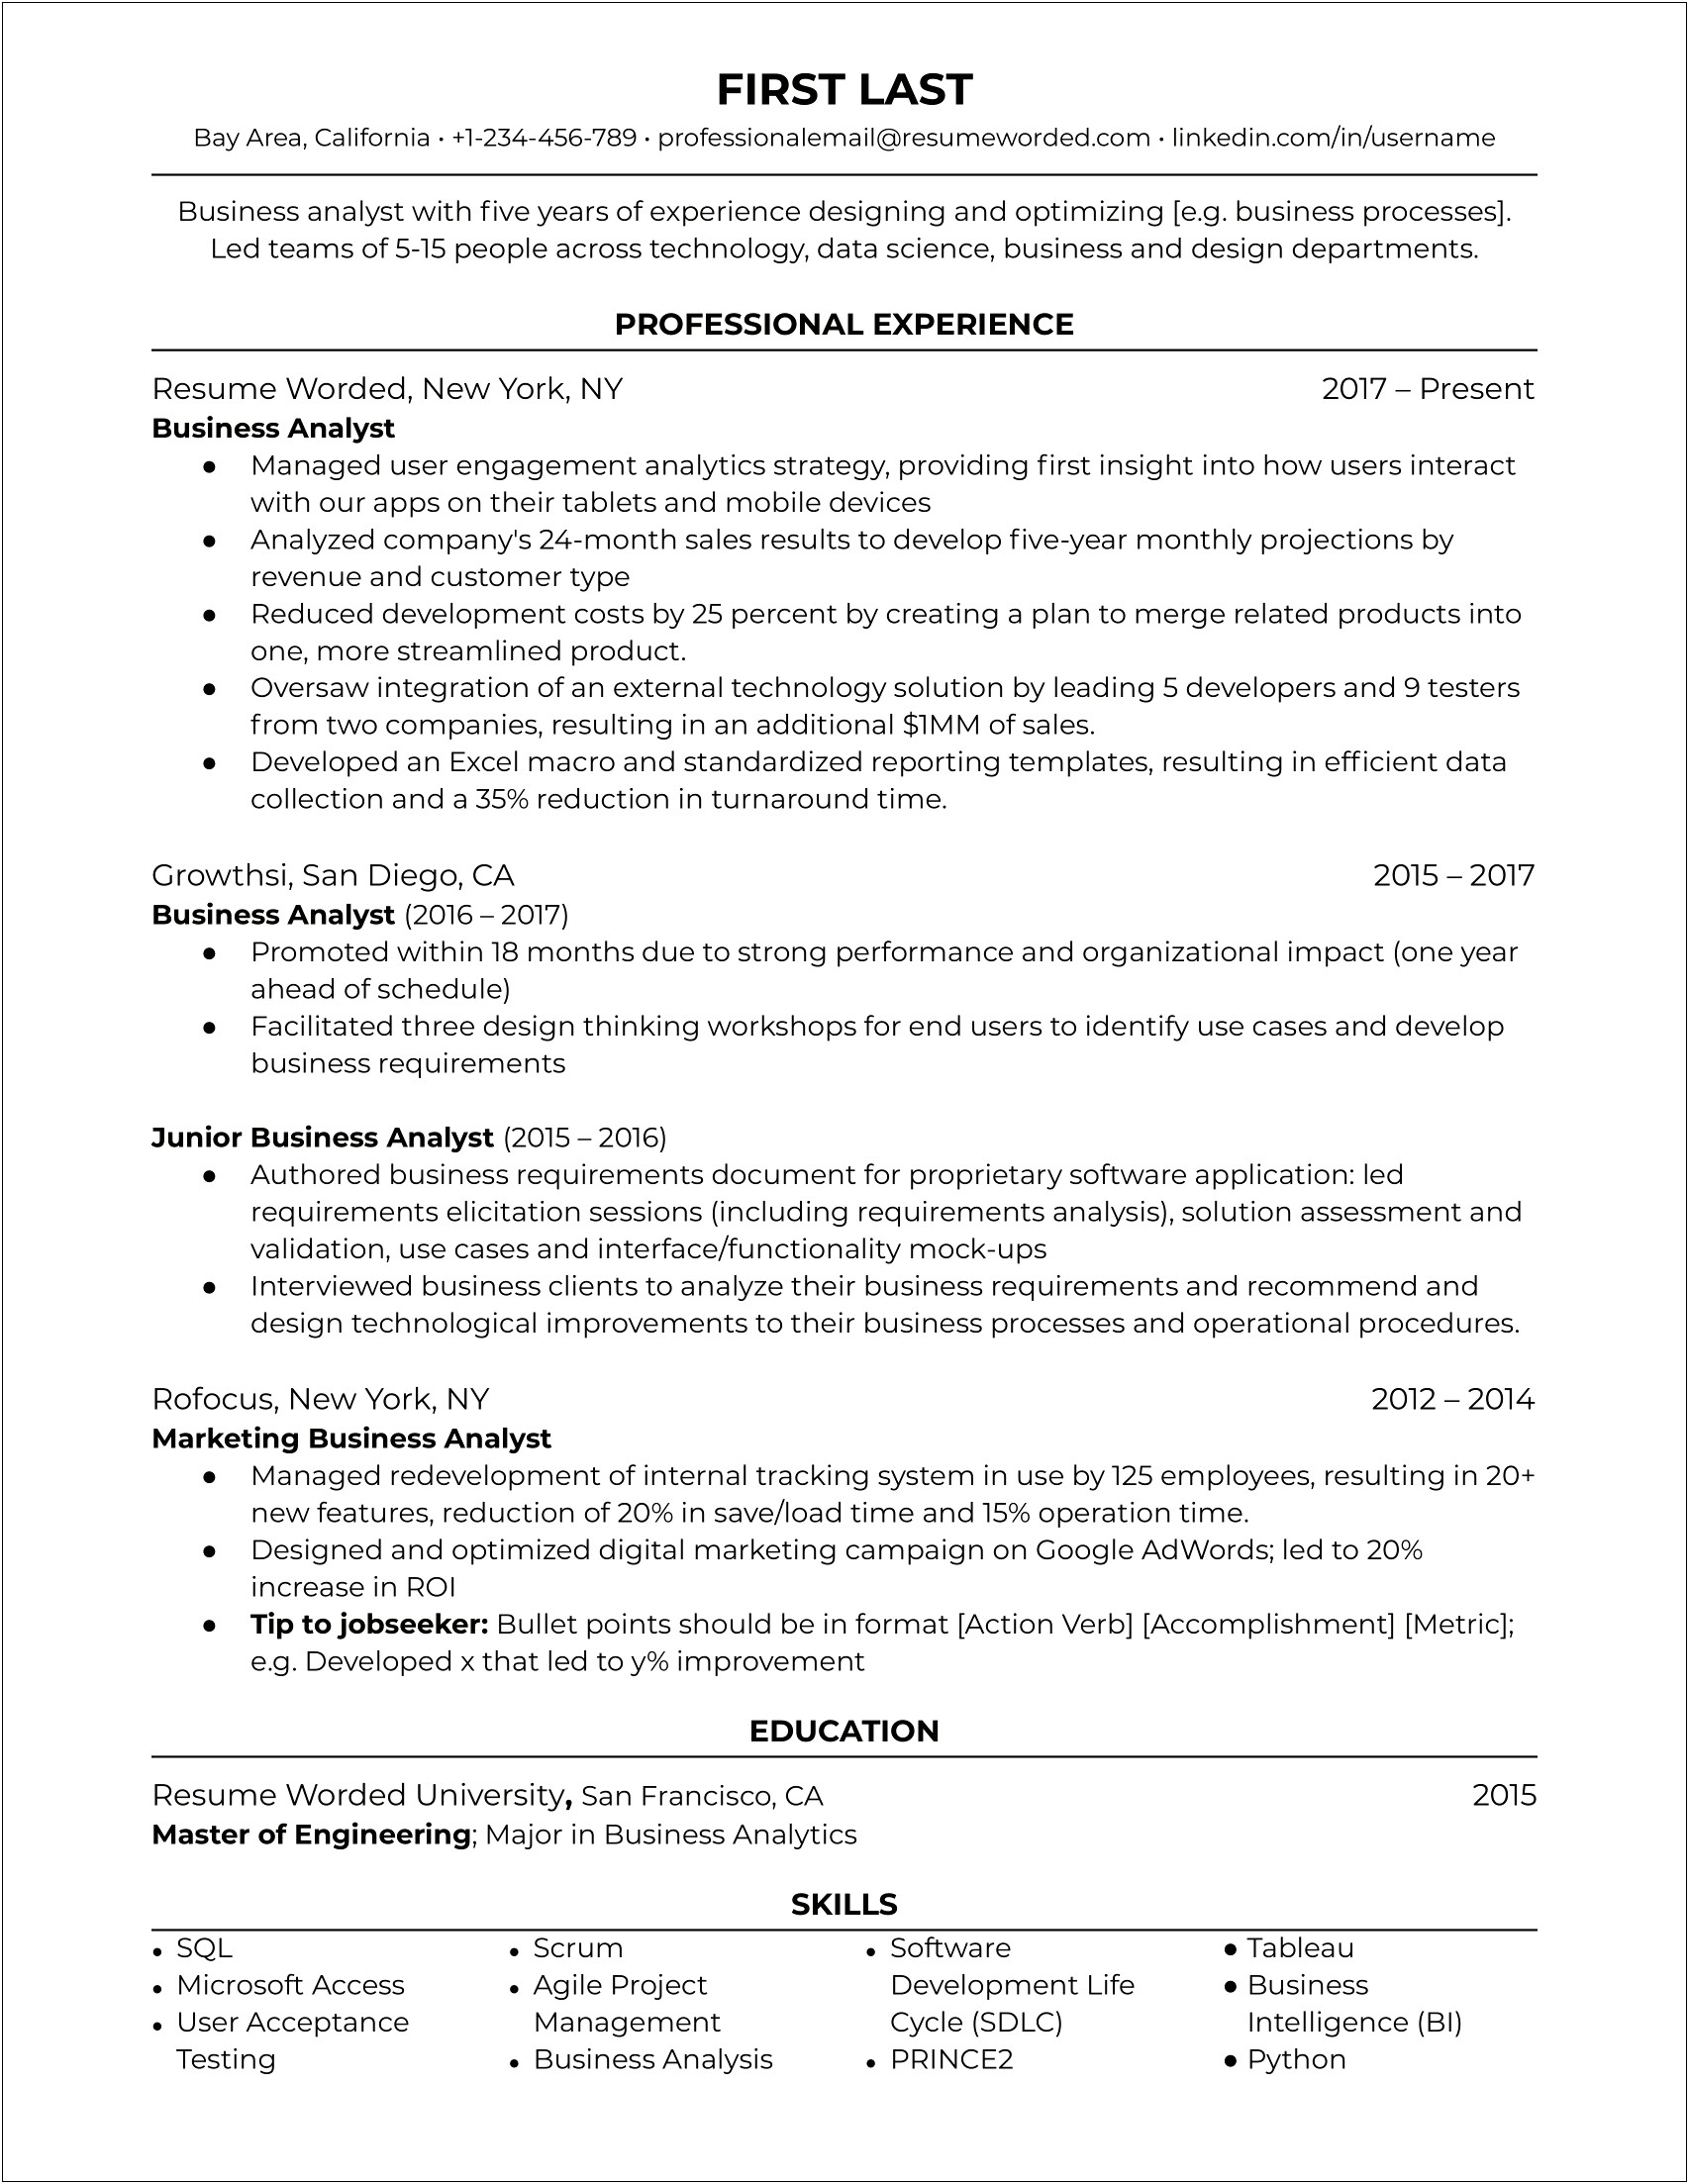 Resume With Bullet Points Sample